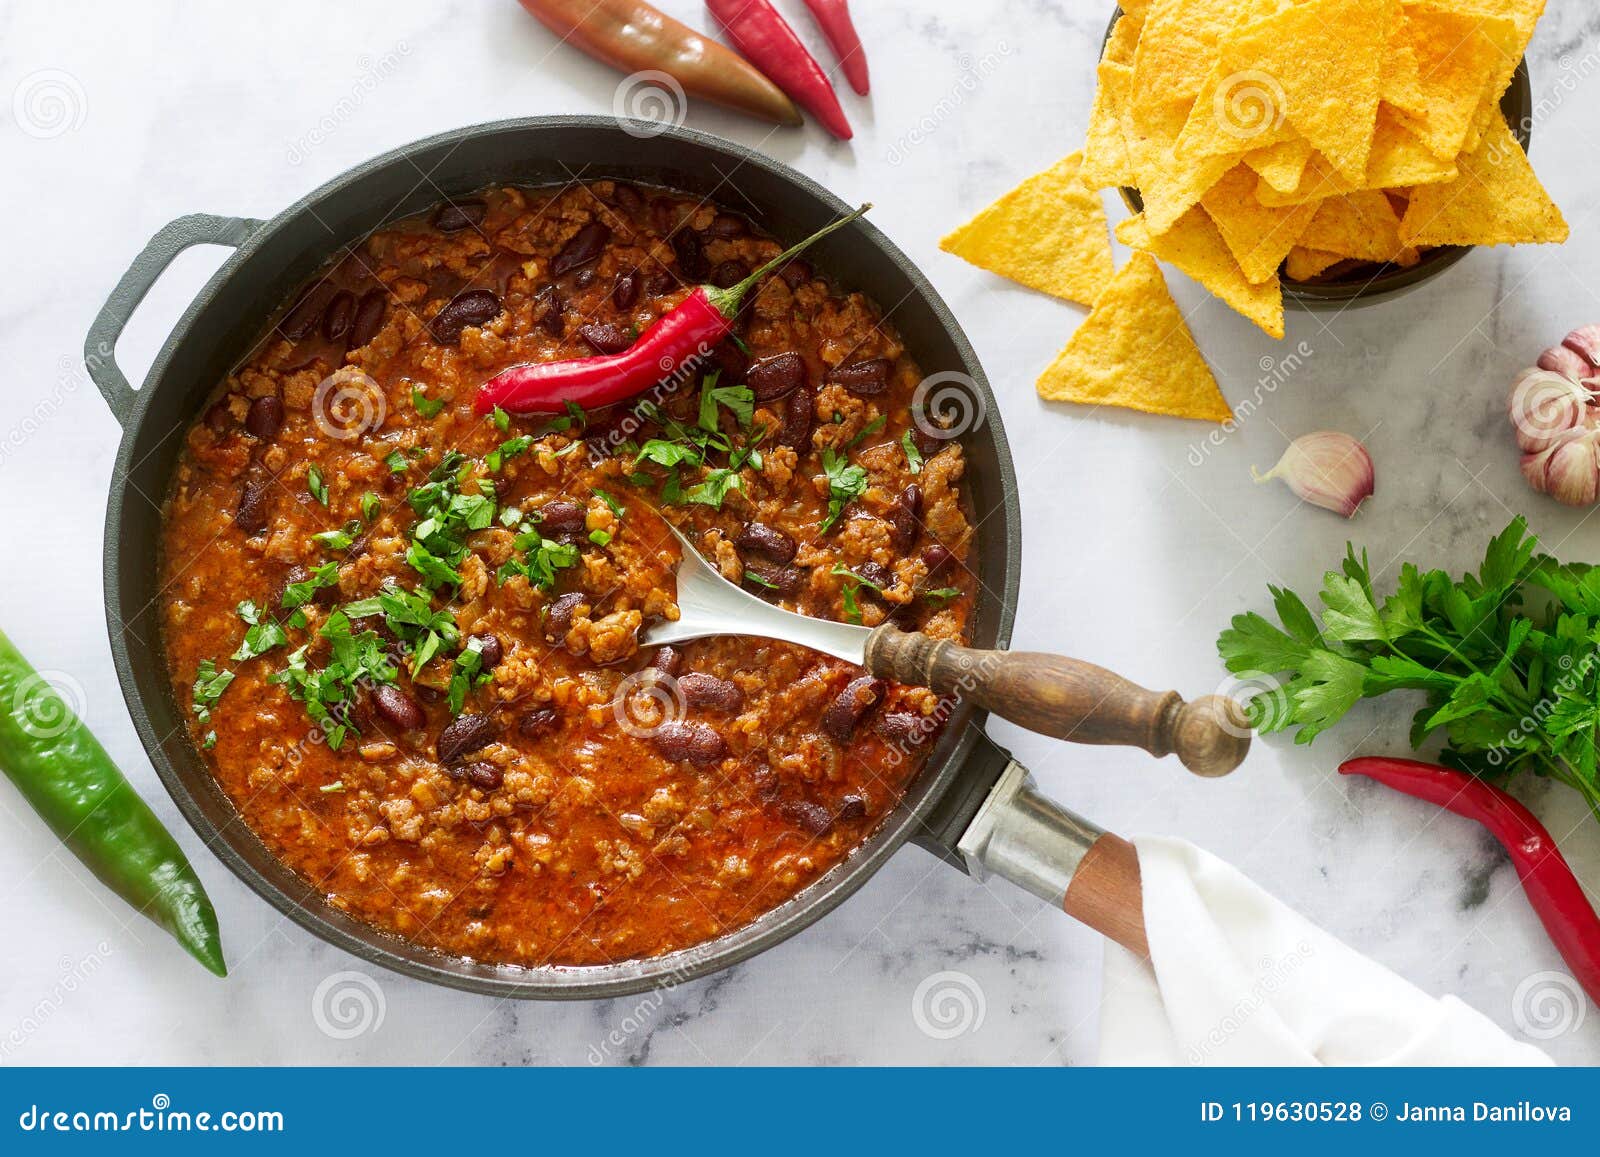 mexican and american food chili con carne served with nachos, pepper and herbs.